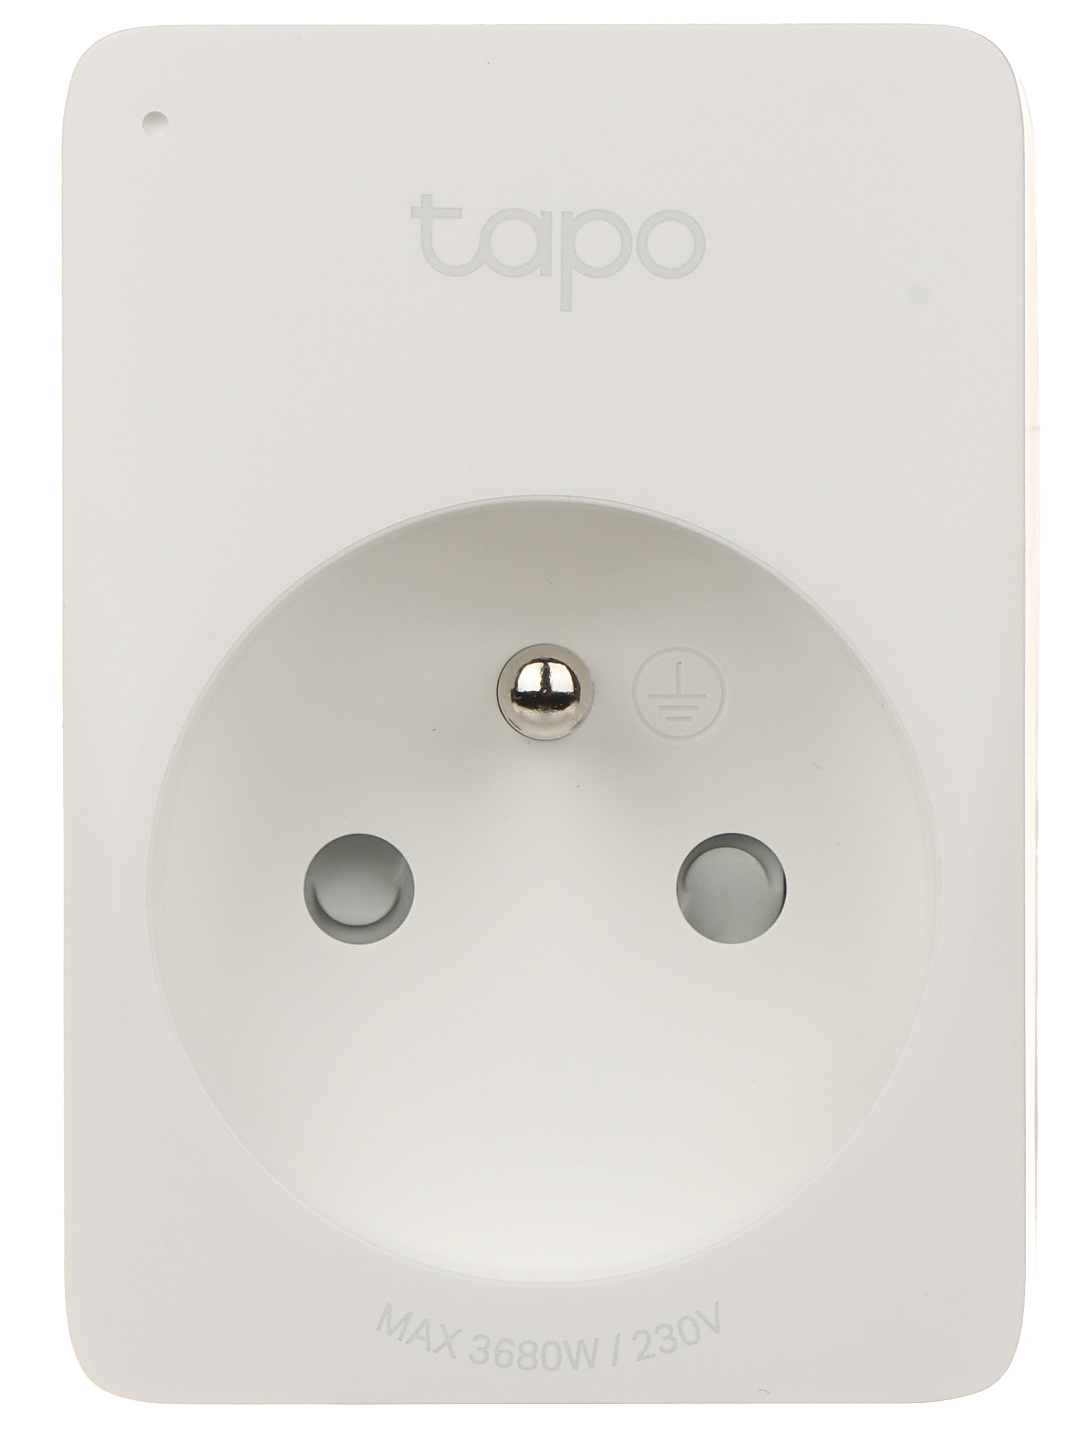 TP-LINK Mini Smart Wi-Fi Socket (16A) with Energy Monitoring, Tapo P110  (TapoP110) - The source for WiFi products at best prices in Europe - wifi -stock.com